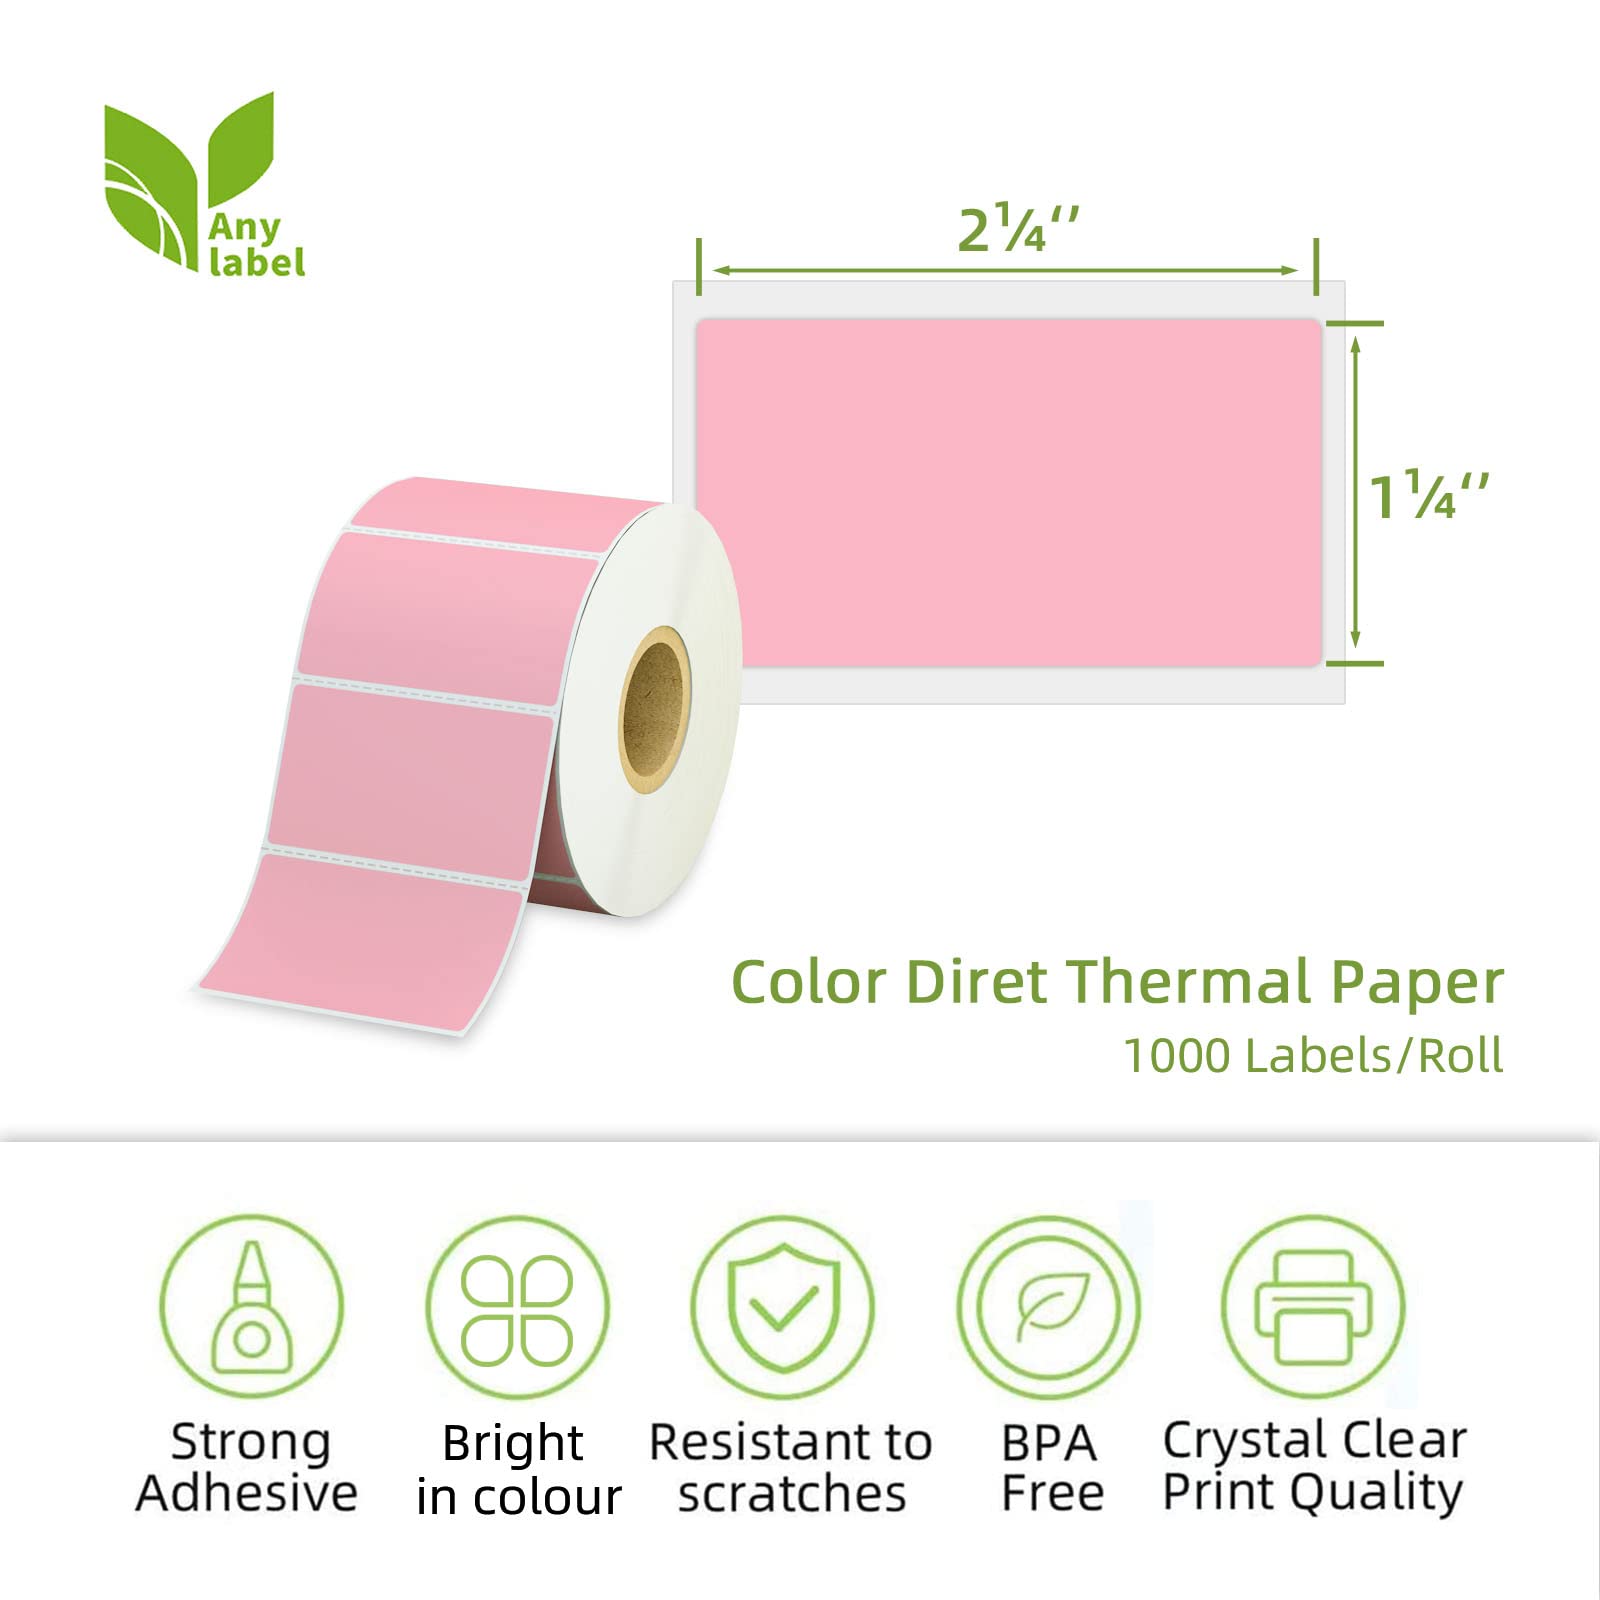 Anylabel 2.25" x 1.25" Pink Direct Thermal Labels, Replacement for Self-Adhesive Address Shipping Barcode Thermal Stickers, Compatible with Rollo & Zebra Thermal Label Printer(1 Roll, 1000 Labels)